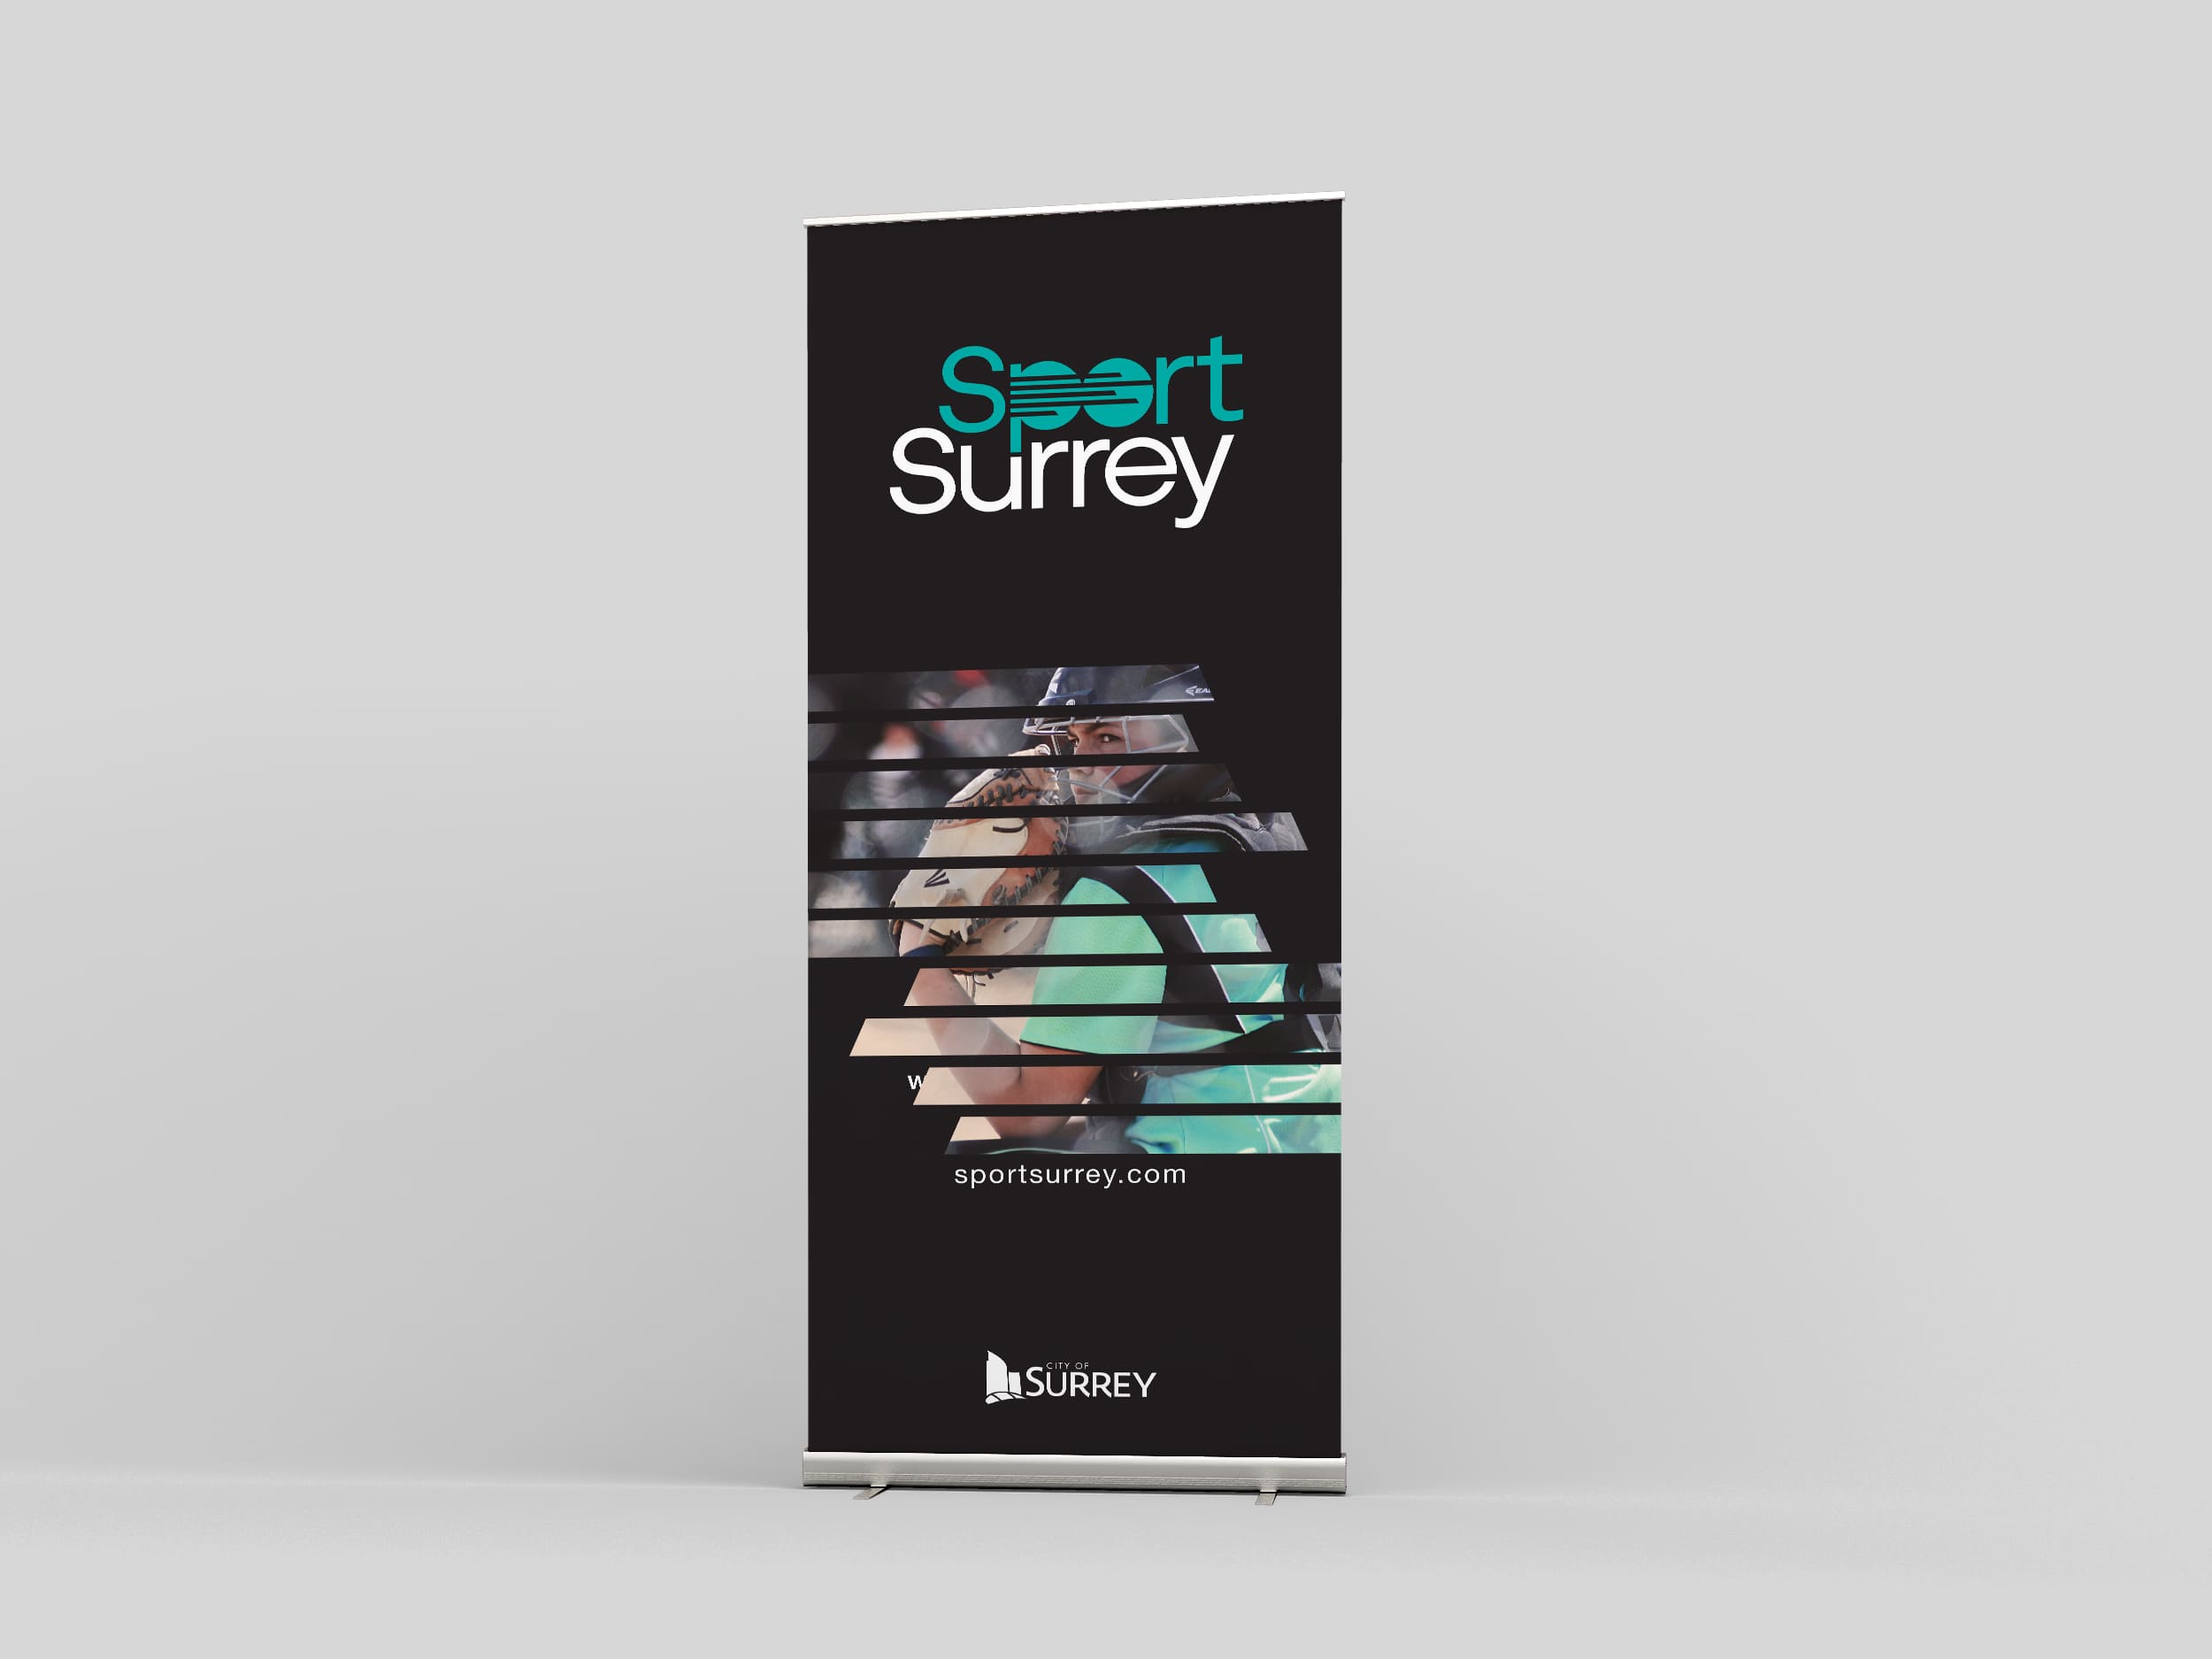 Sport Surrey's mock-cover of a black brochure, featuring refreshed logo